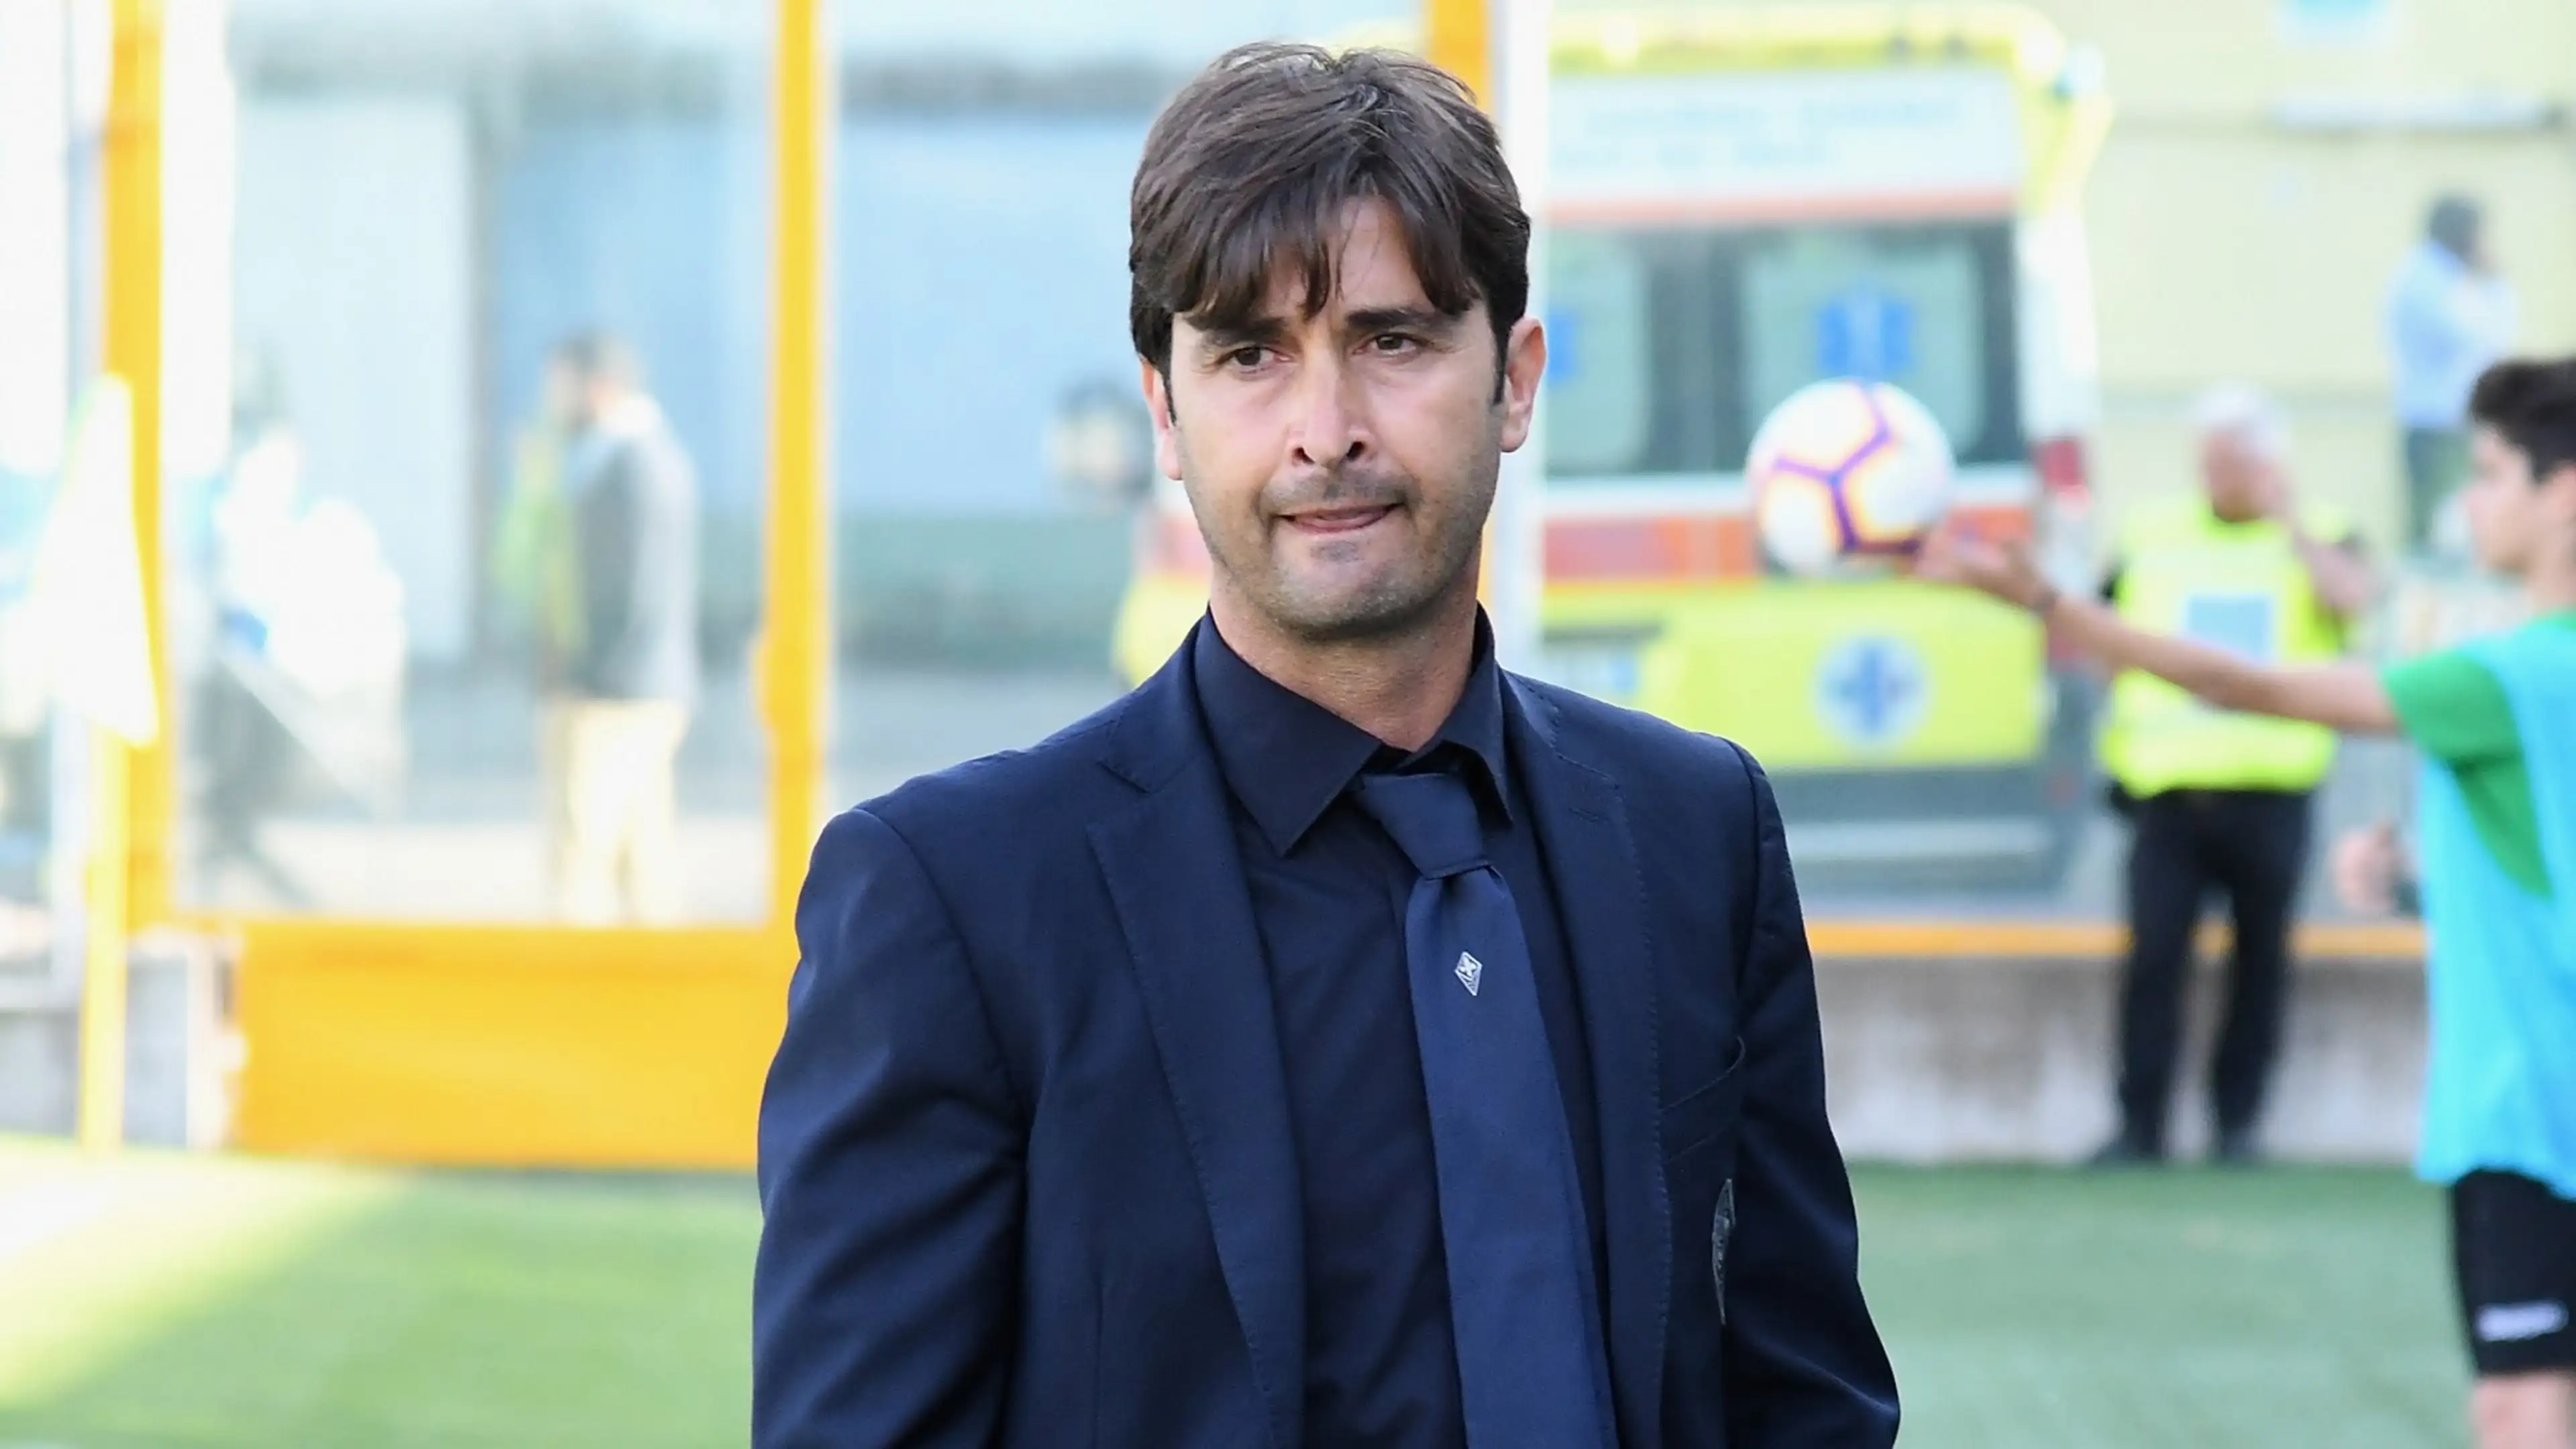 Following a string of poor results, Sassuolo have pulled the plug on Alessio Dionisi and elevated Primavera coach Emiliano Bigica.